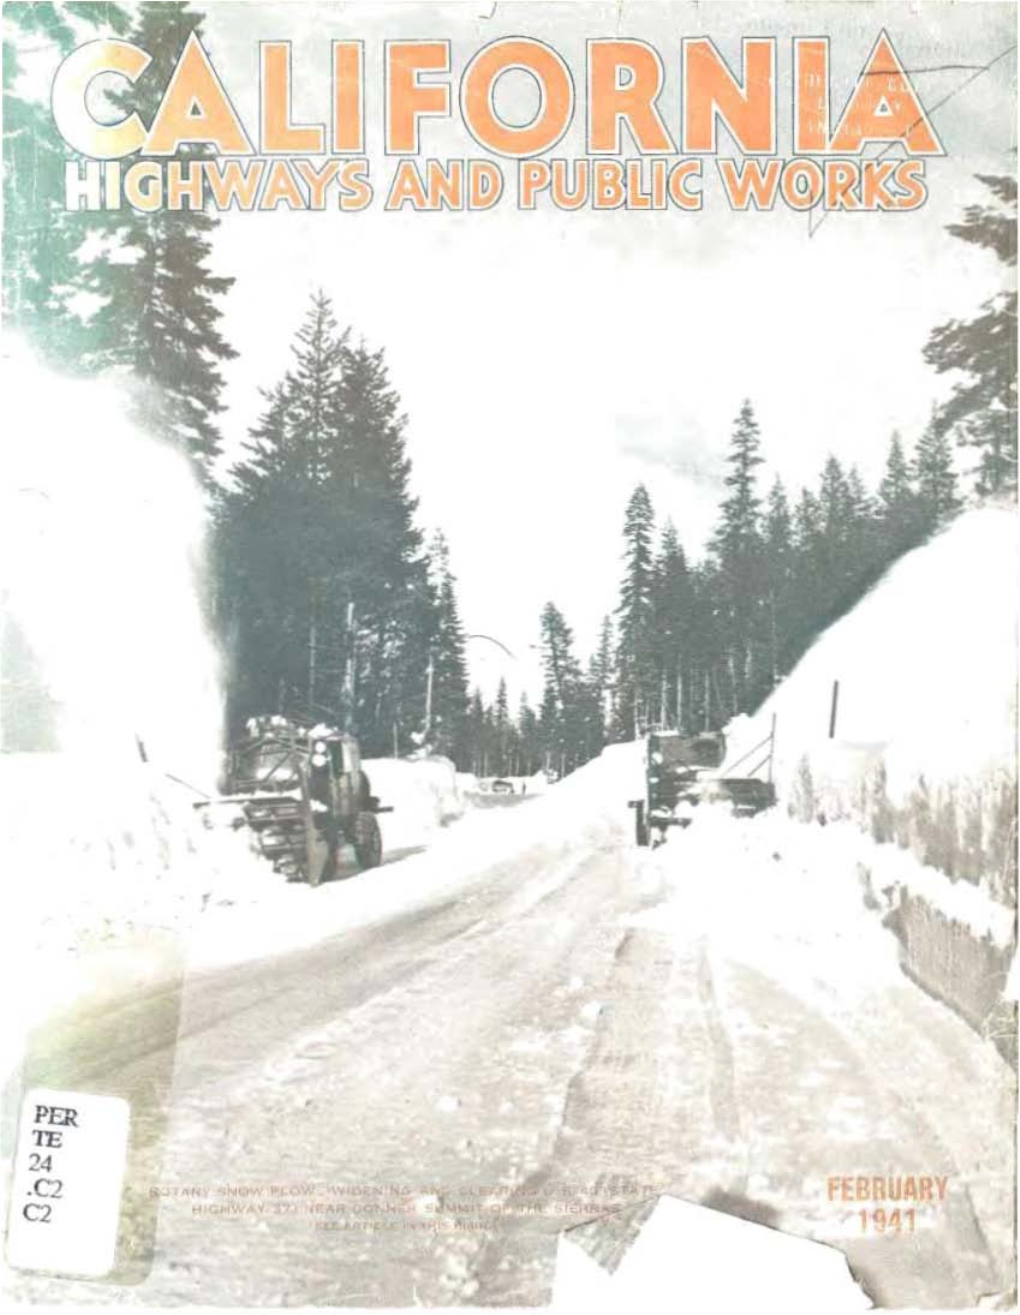 California Highways and Public Works, February 1941